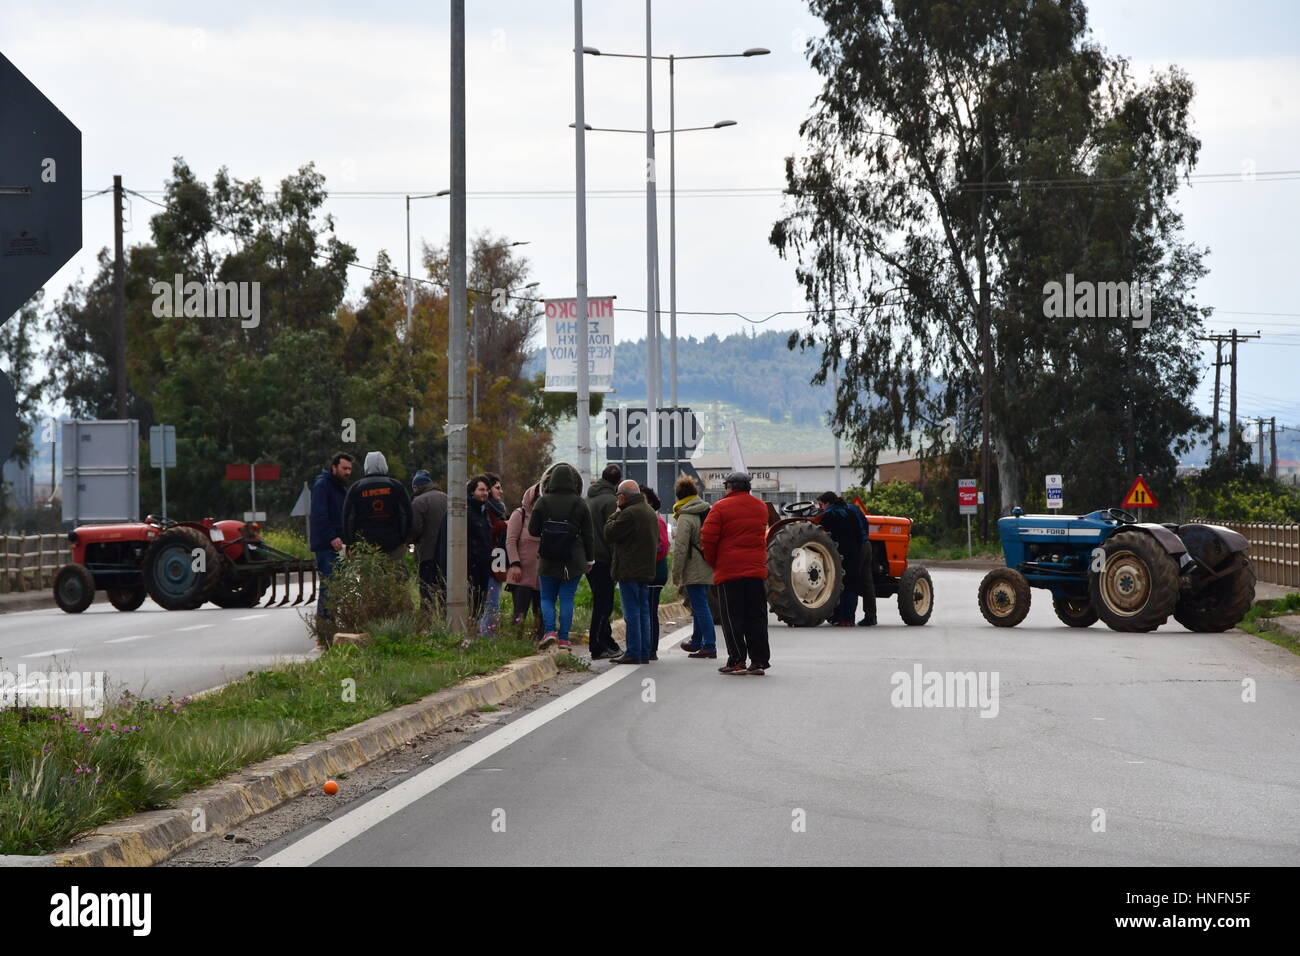 Argos, Greece, 12th February 2017. Farmers and ranchers from Argolis made a two-hour blockade of the National  Road Argos Corinth at junction of Inach Stock Photo